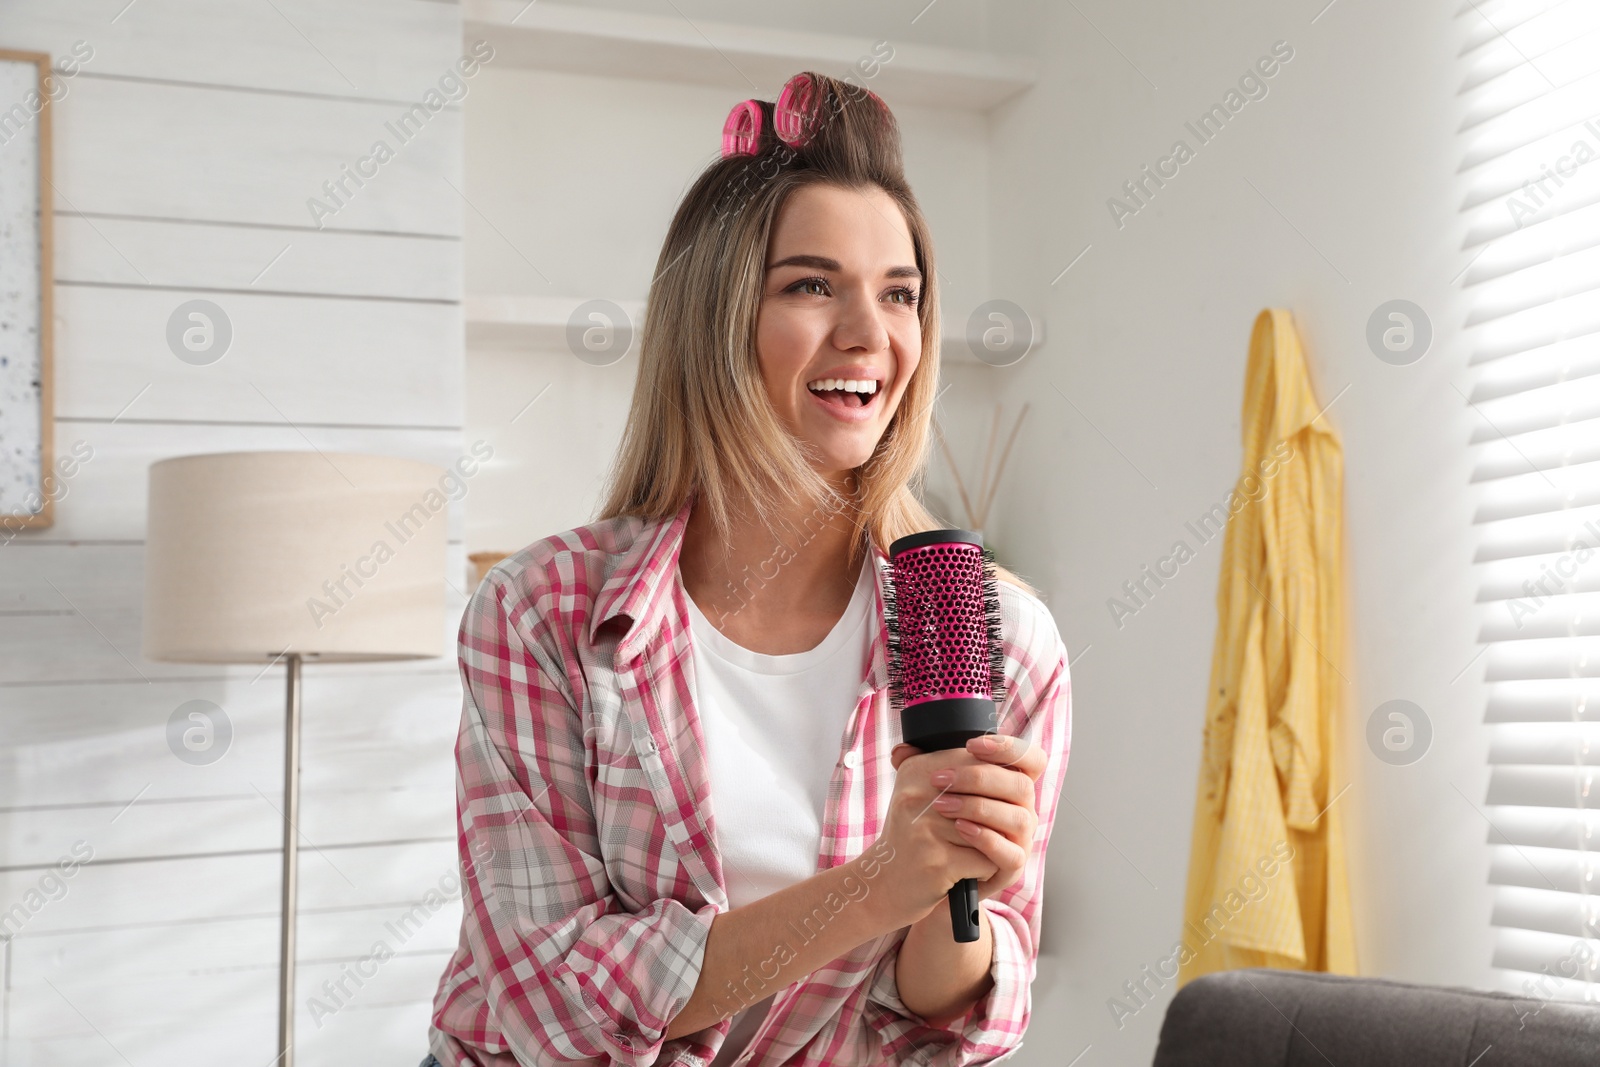 Photo of Woman with hairbrush singing in room at home